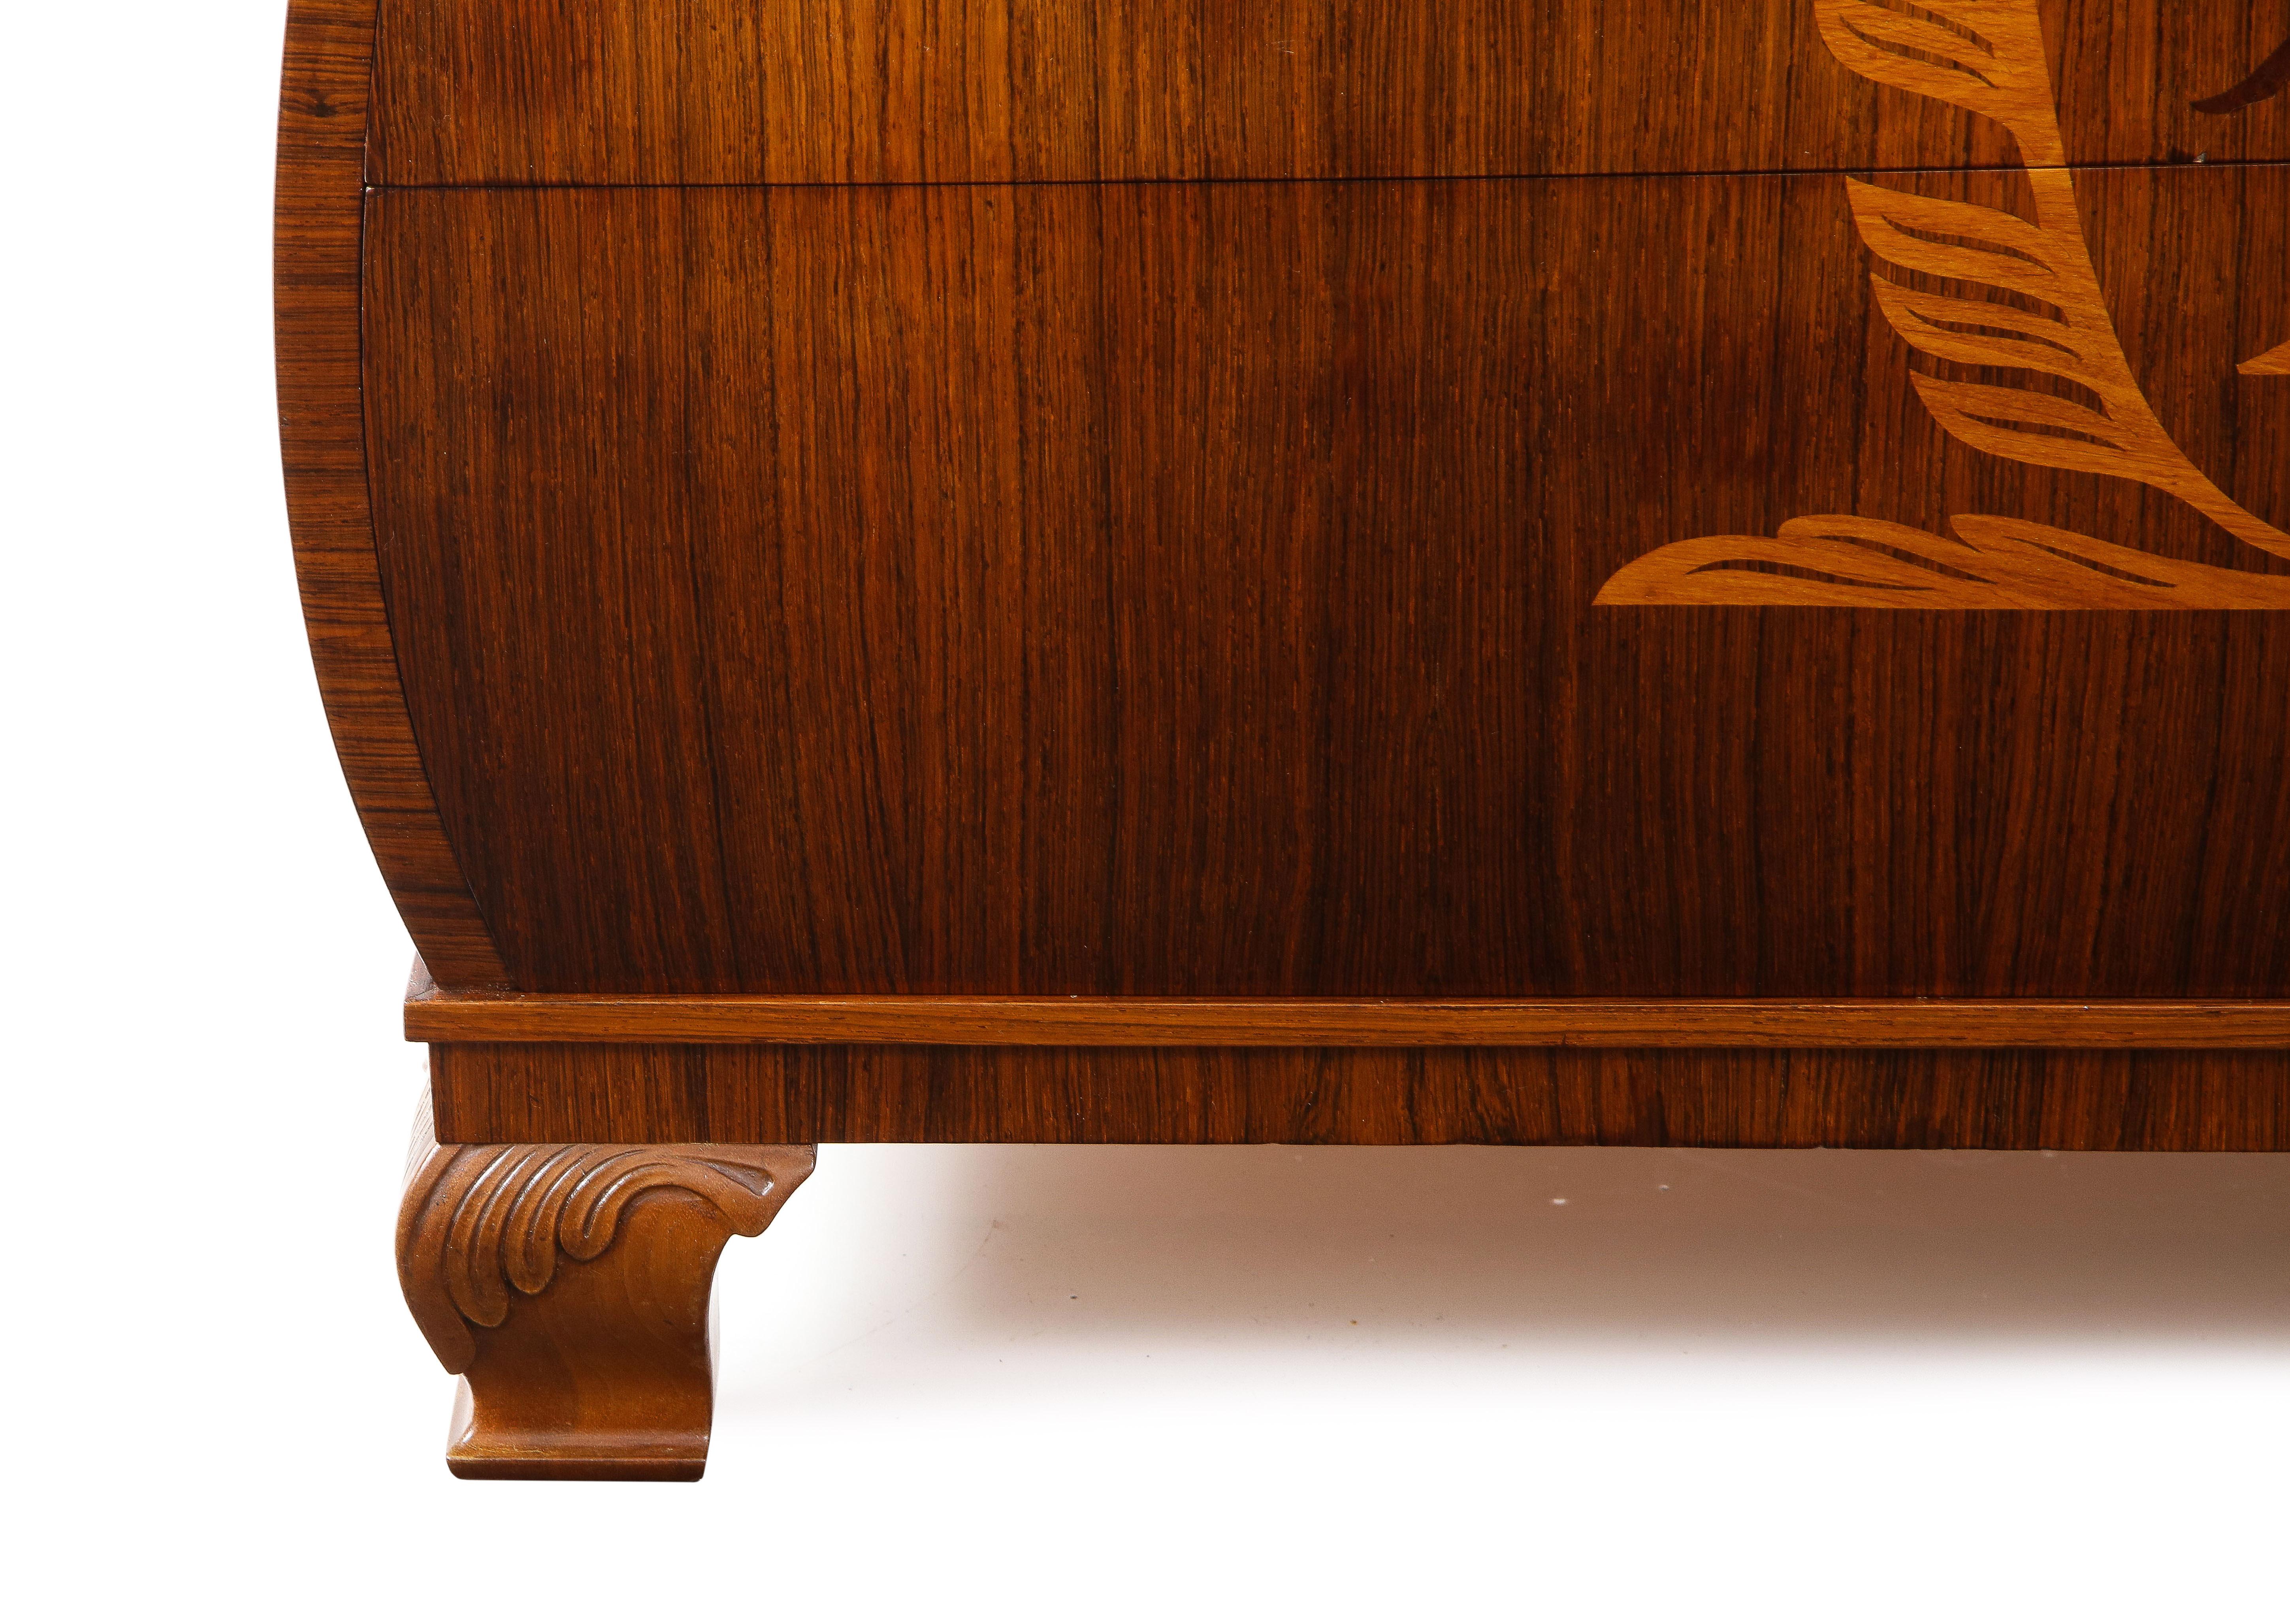 Wood Swedish Grace Fruitwood Inlaid Rosewood Chest of Drawers, Circa 1930-40